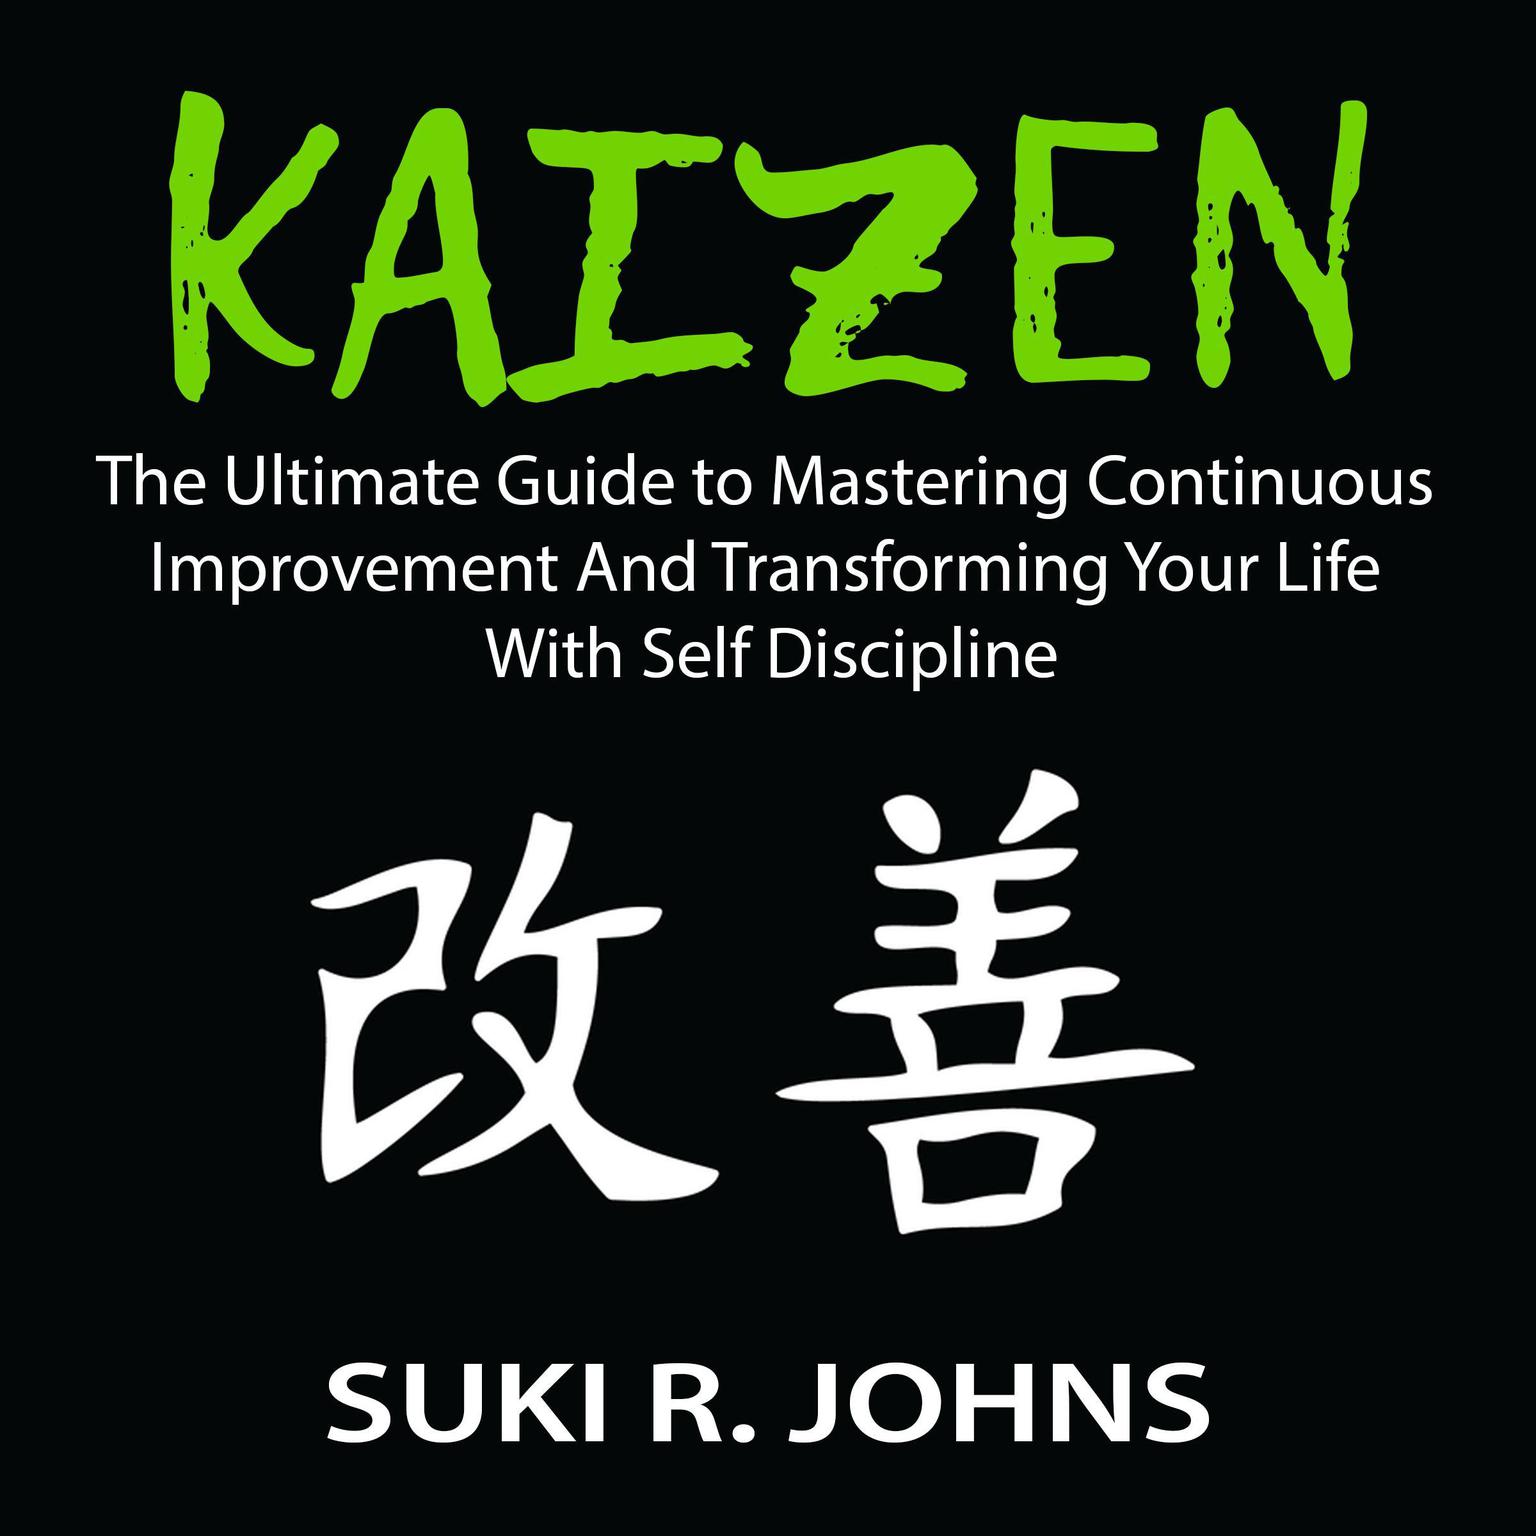 Kaizen: The Ultimate Guide to Mastering Continuous Improvement And Transforming Your Life With Self Discipline Audiobook, by Suki R. Johns